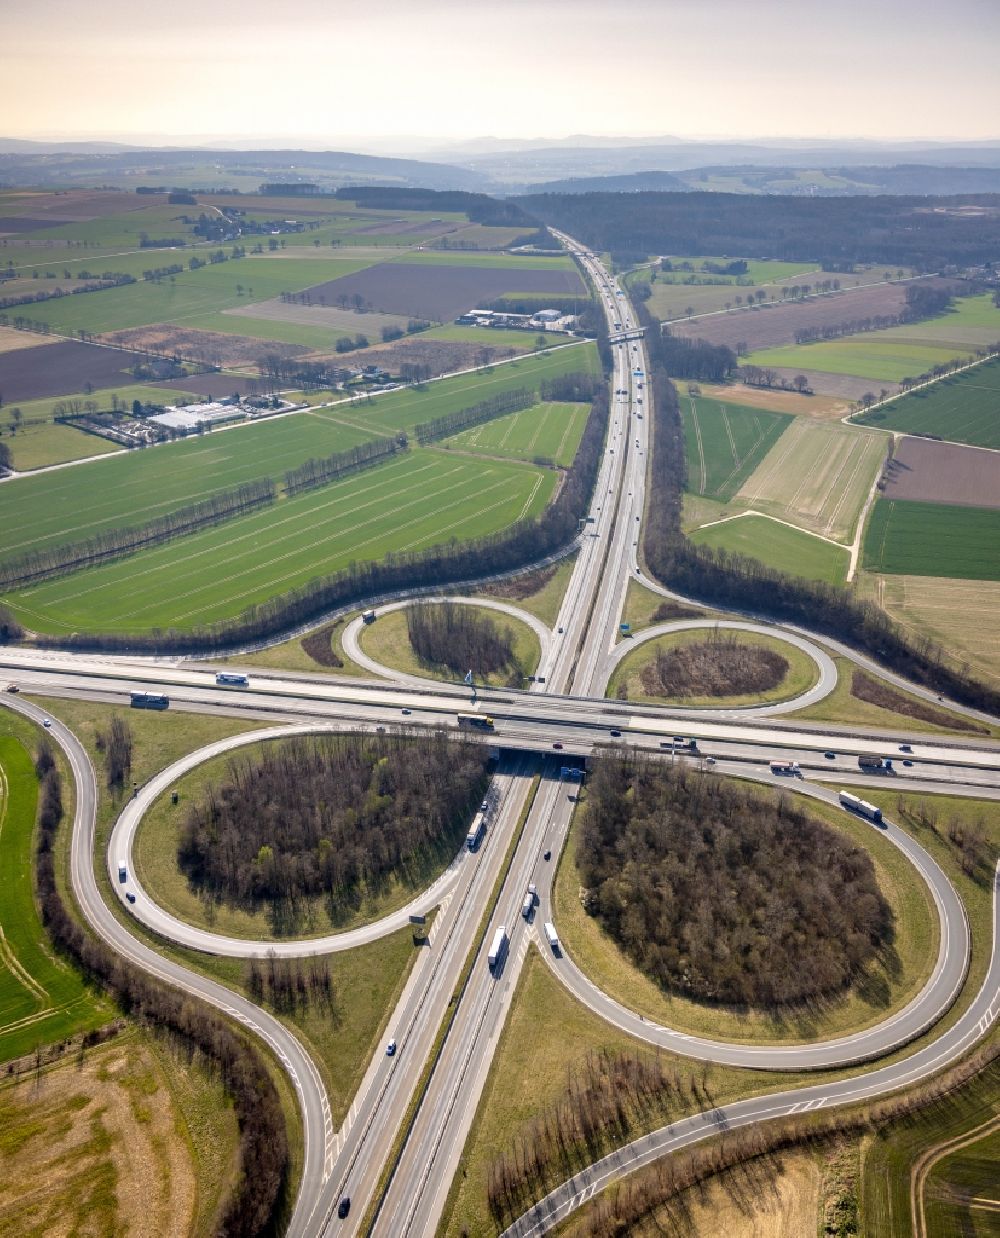 Aerial image Werl - Traffic flow at the intersection- motorway A44 - BAB 445 in form of cloverleaf in Werl at Ruhrgebiet in the state North Rhine-Westphalia, Germany